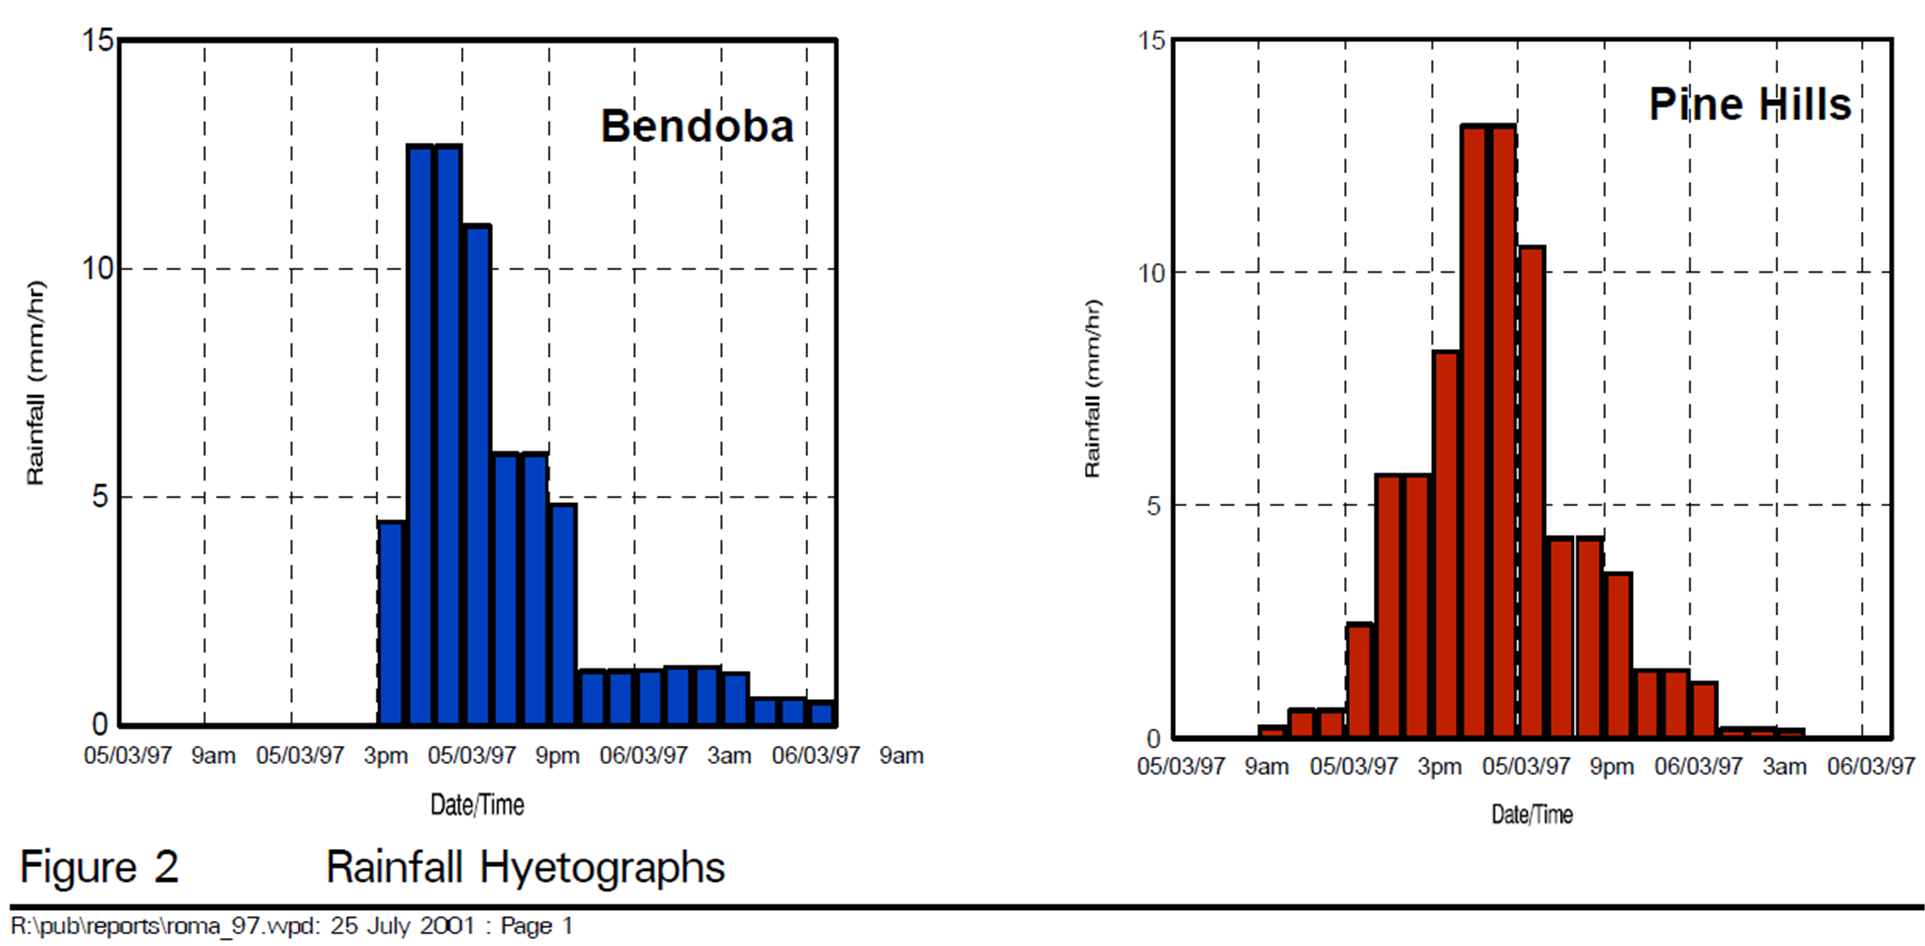 Rainfall Hyetographs showing hourly rainfall data for selected stations near the catchment